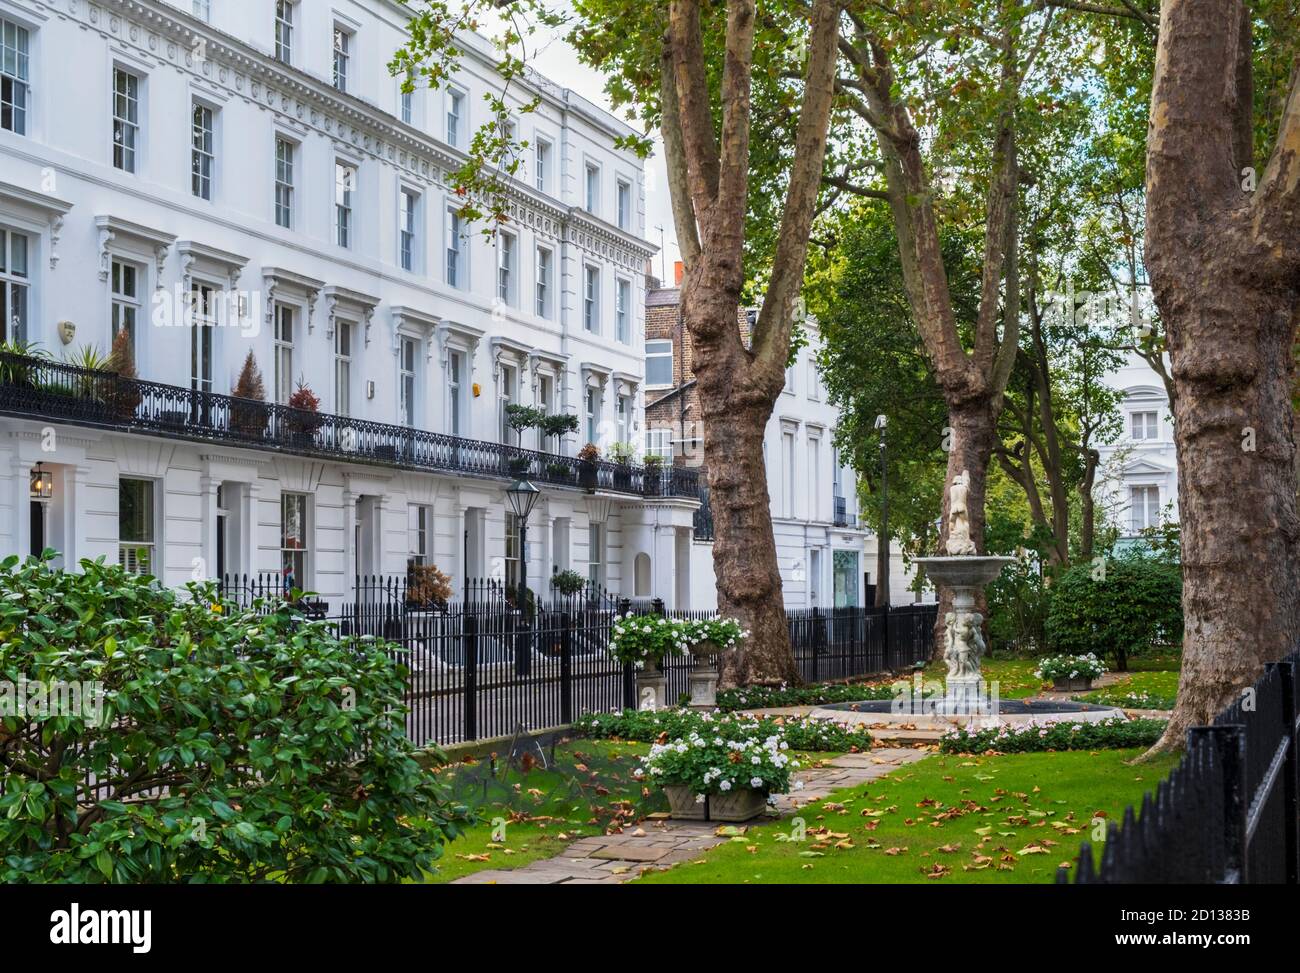 Real estate, Wellington Square, Chelsea, London, SW3 4NR, private park and key garden, No. 30 was James Bond's fictional home, 19th Century townhouses Stock Photo